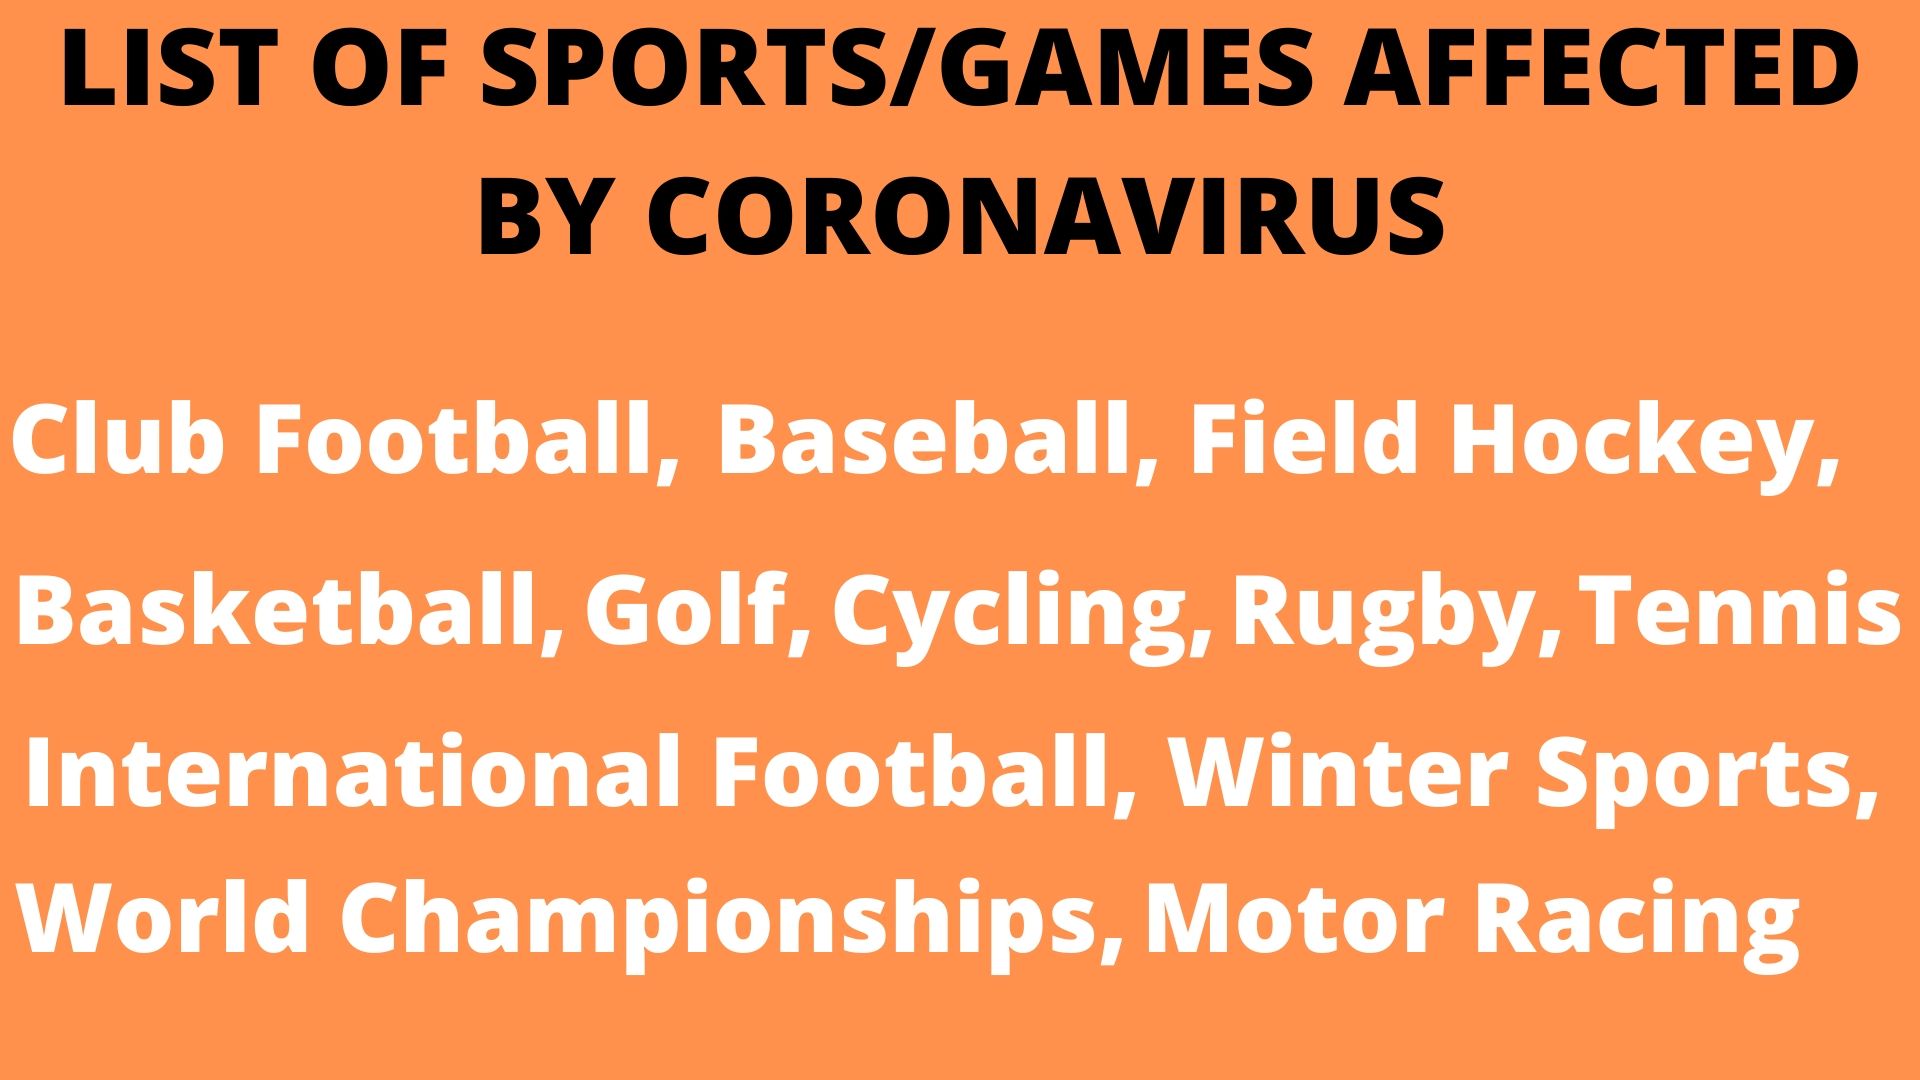 Sports/games affected by Coronavirus